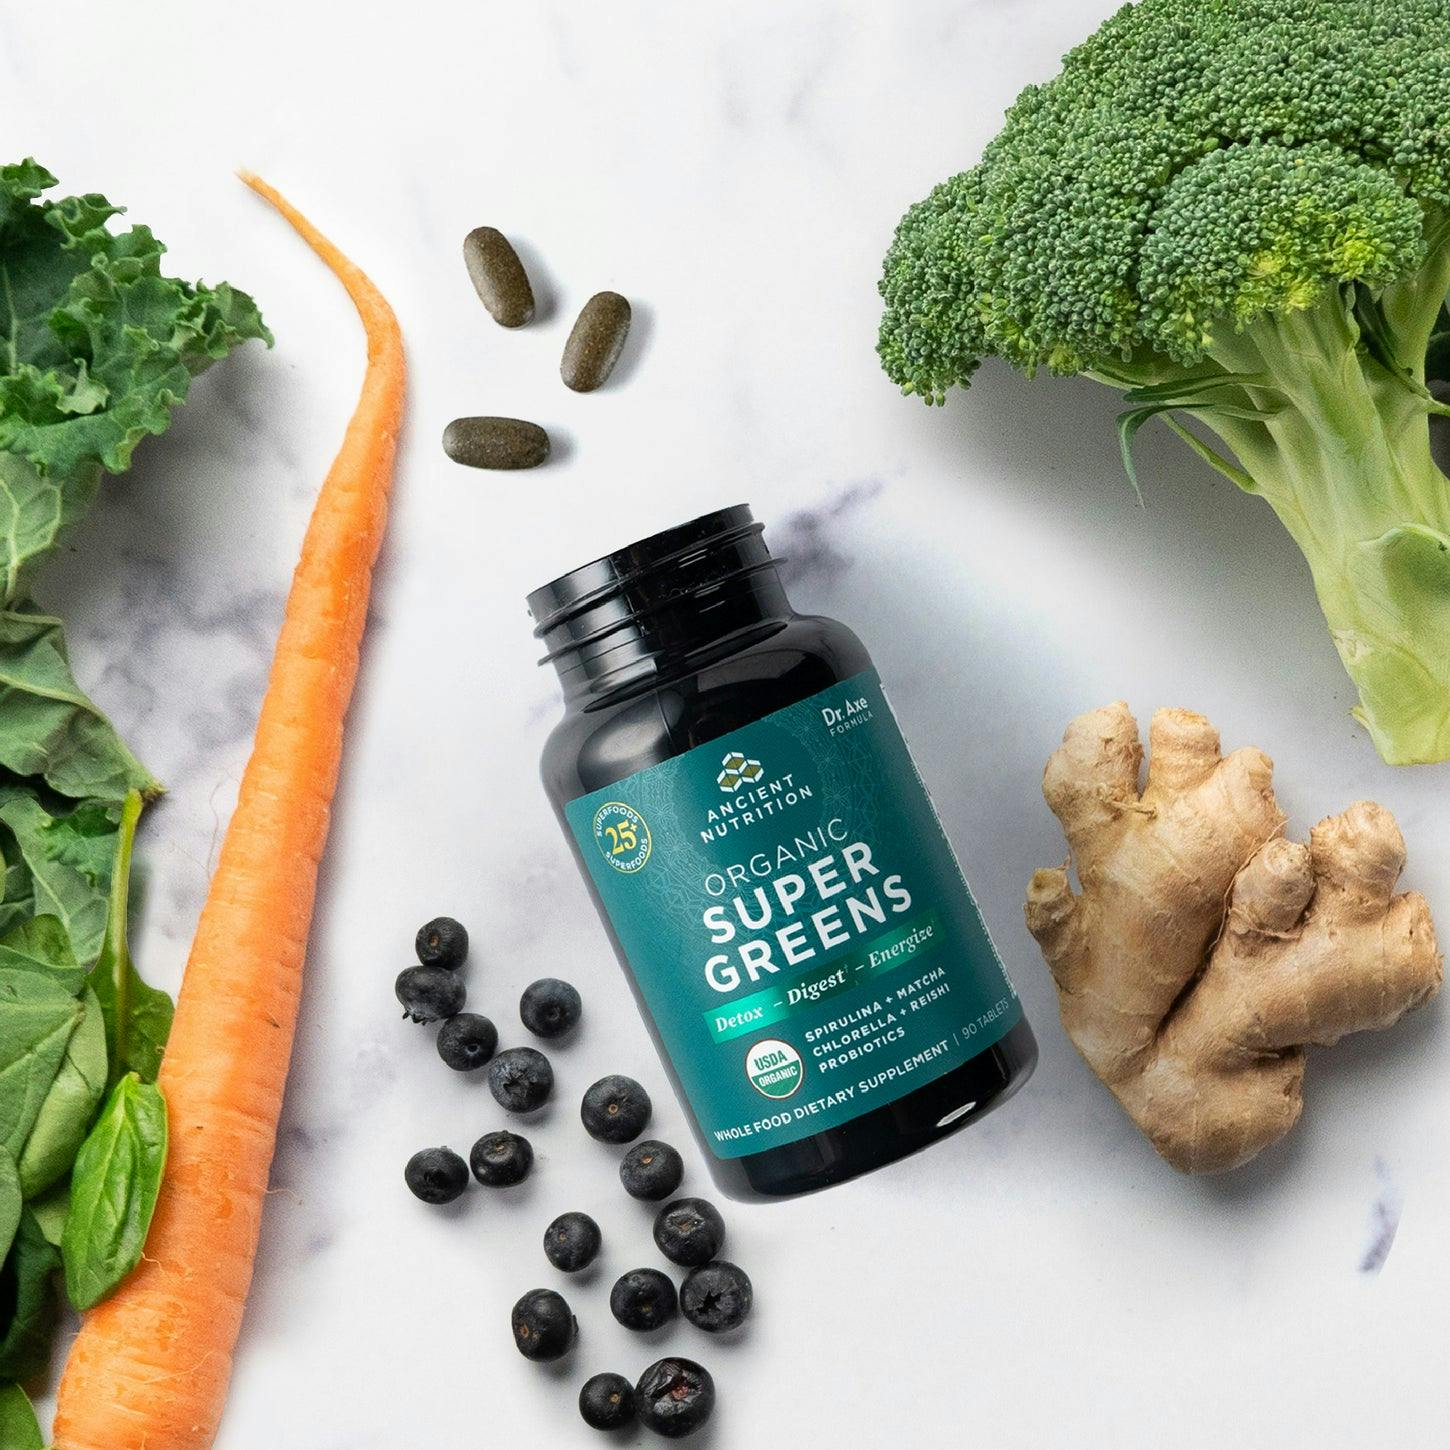 Organic SuperGreens Tablets next to broccoli, carrots and gingerr